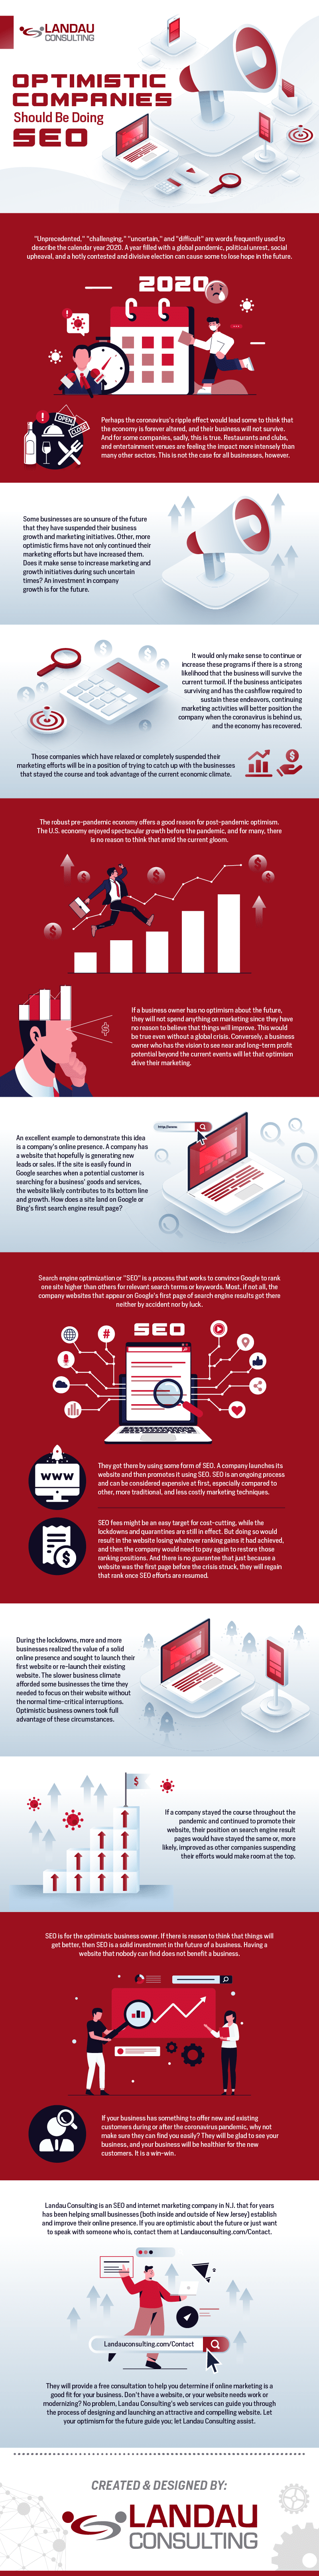 Optimistic Companies Should Be Doing SEO Infographic